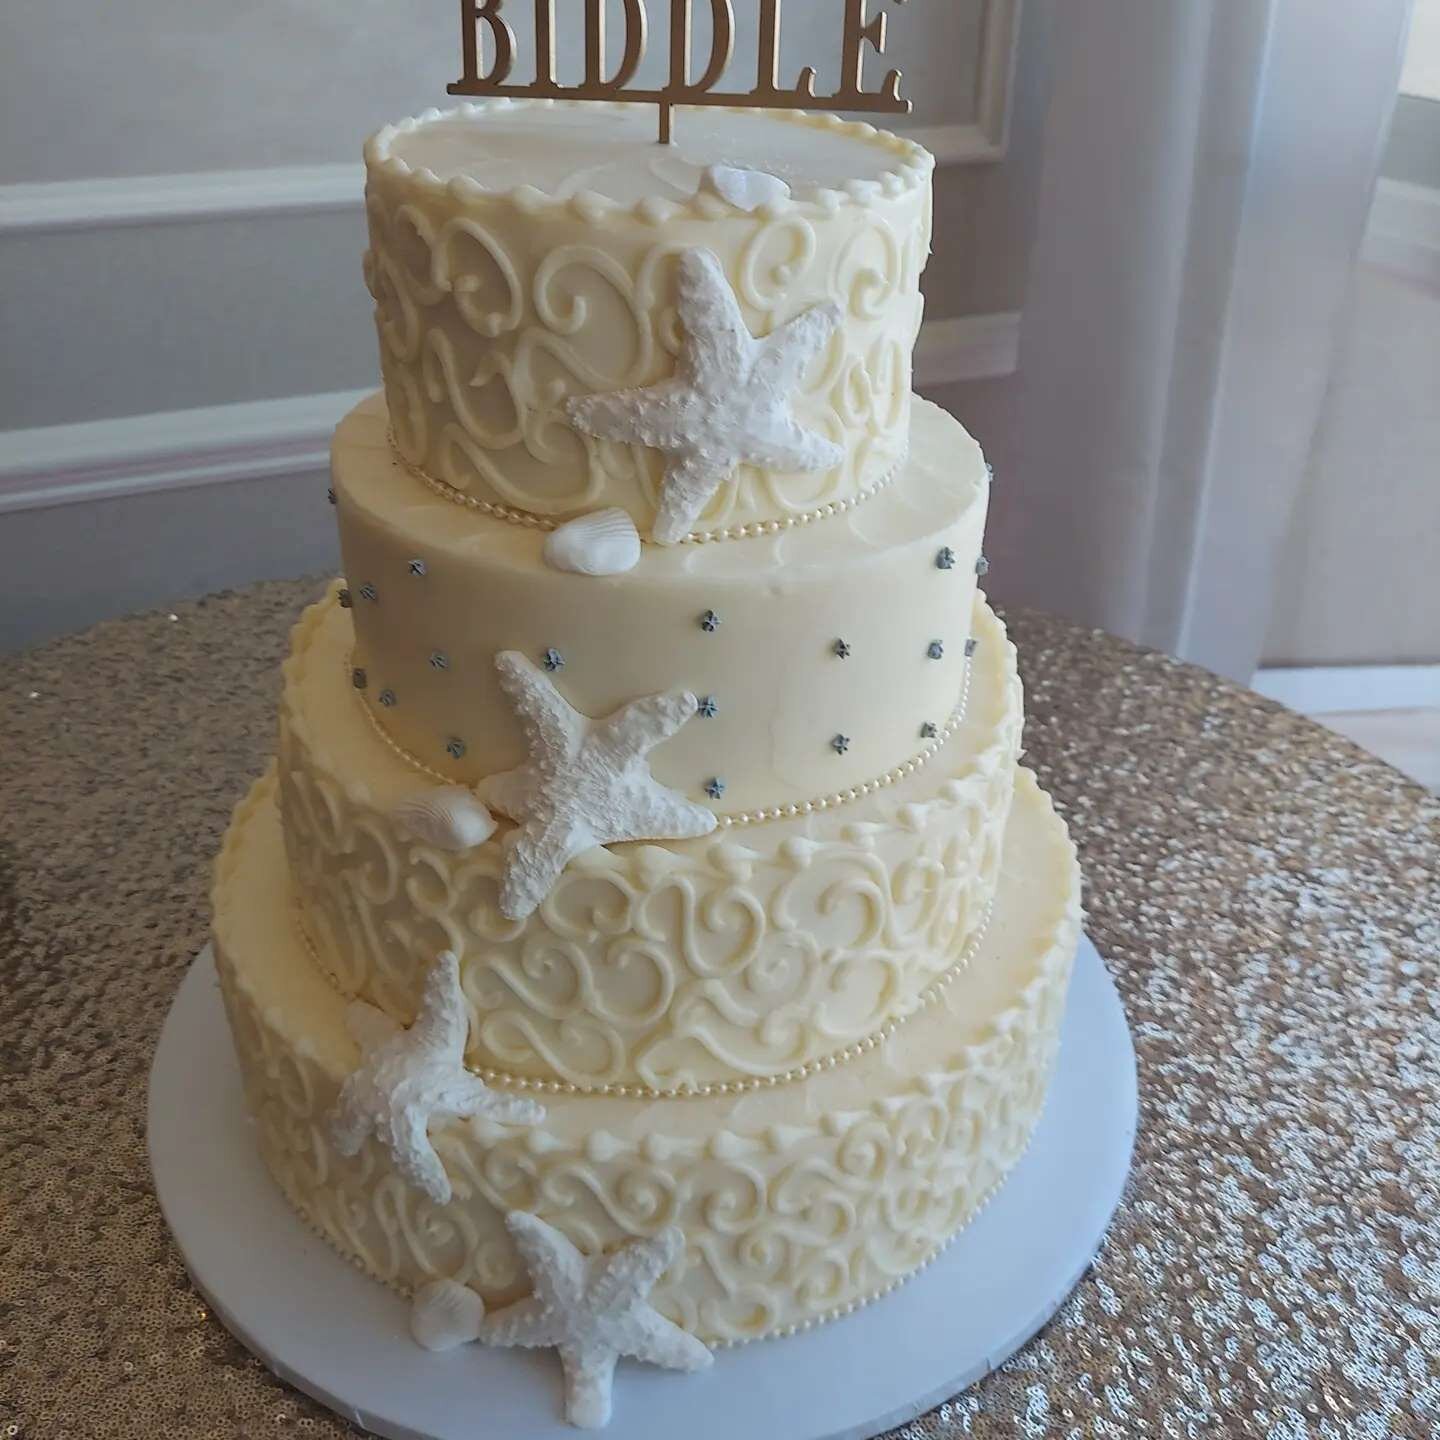 This was 3 I managed to get pictures of this past weekend I did 20 total. It was a record week for wedding cakes.  They all went to @anthonysoceanview  @seasonsct  @saybrookpointresort and @thespaatnorwich thank you for the business!!!